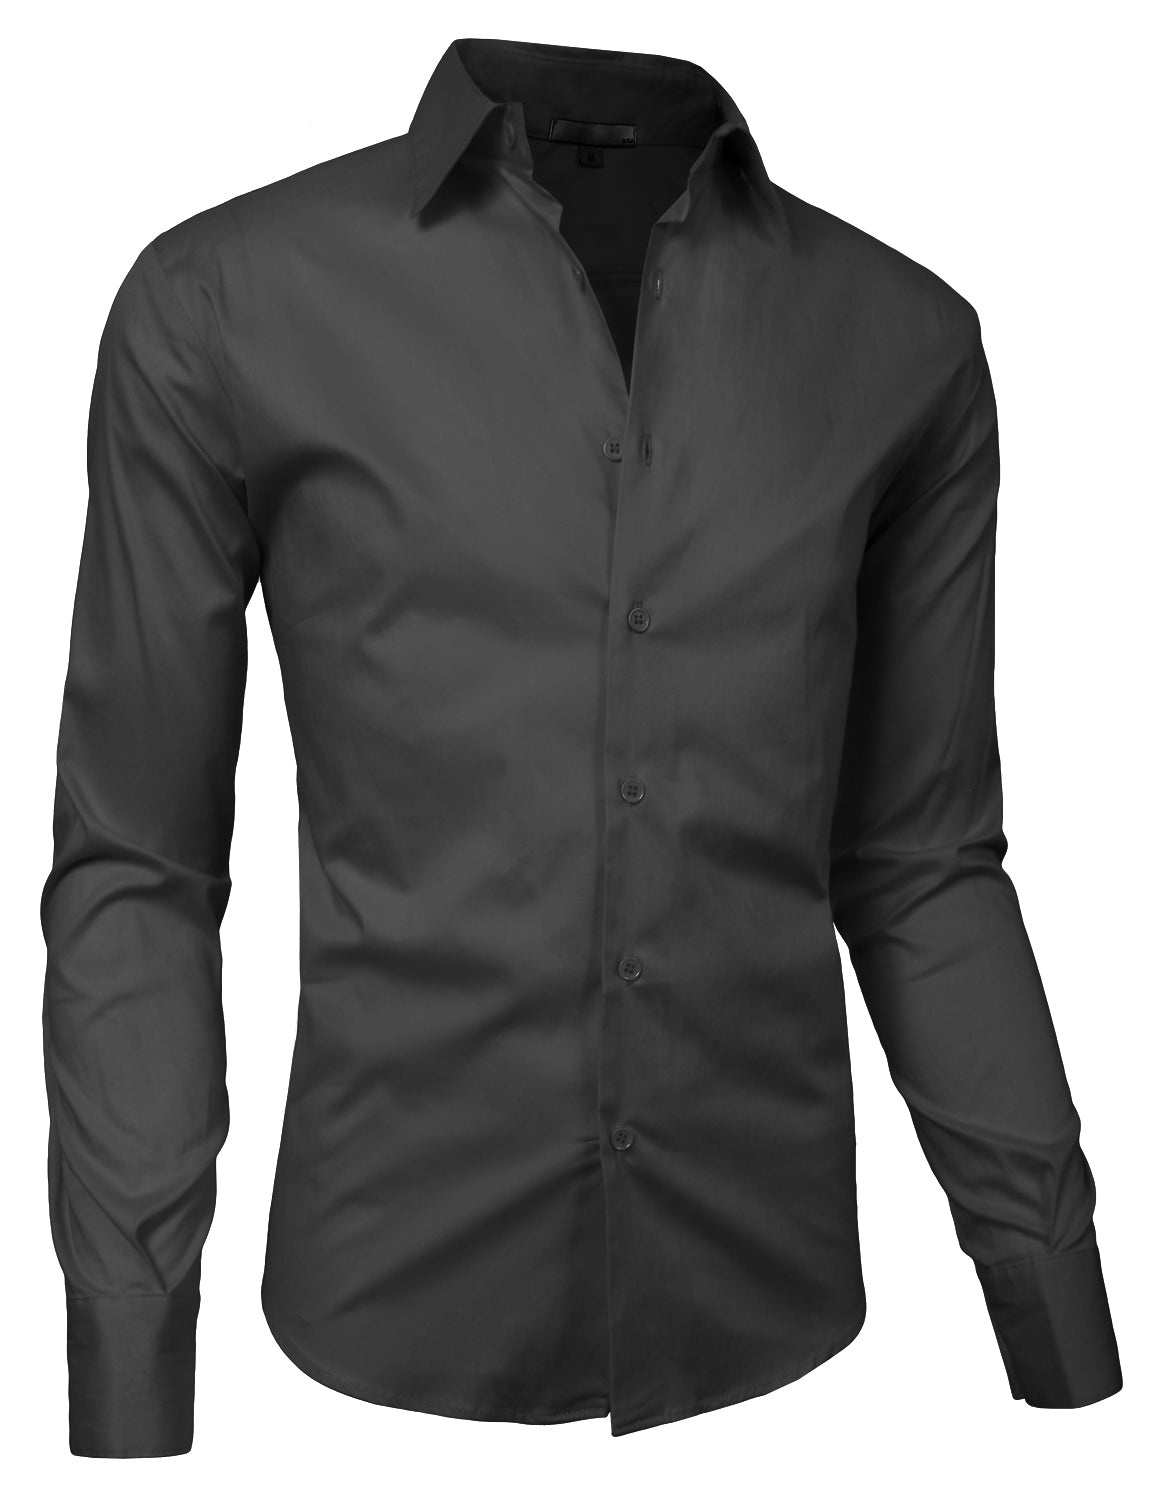 MEN'S SLIM FIT TAILORED BUTTON DOWN SHIRTS - NE PEOPLE